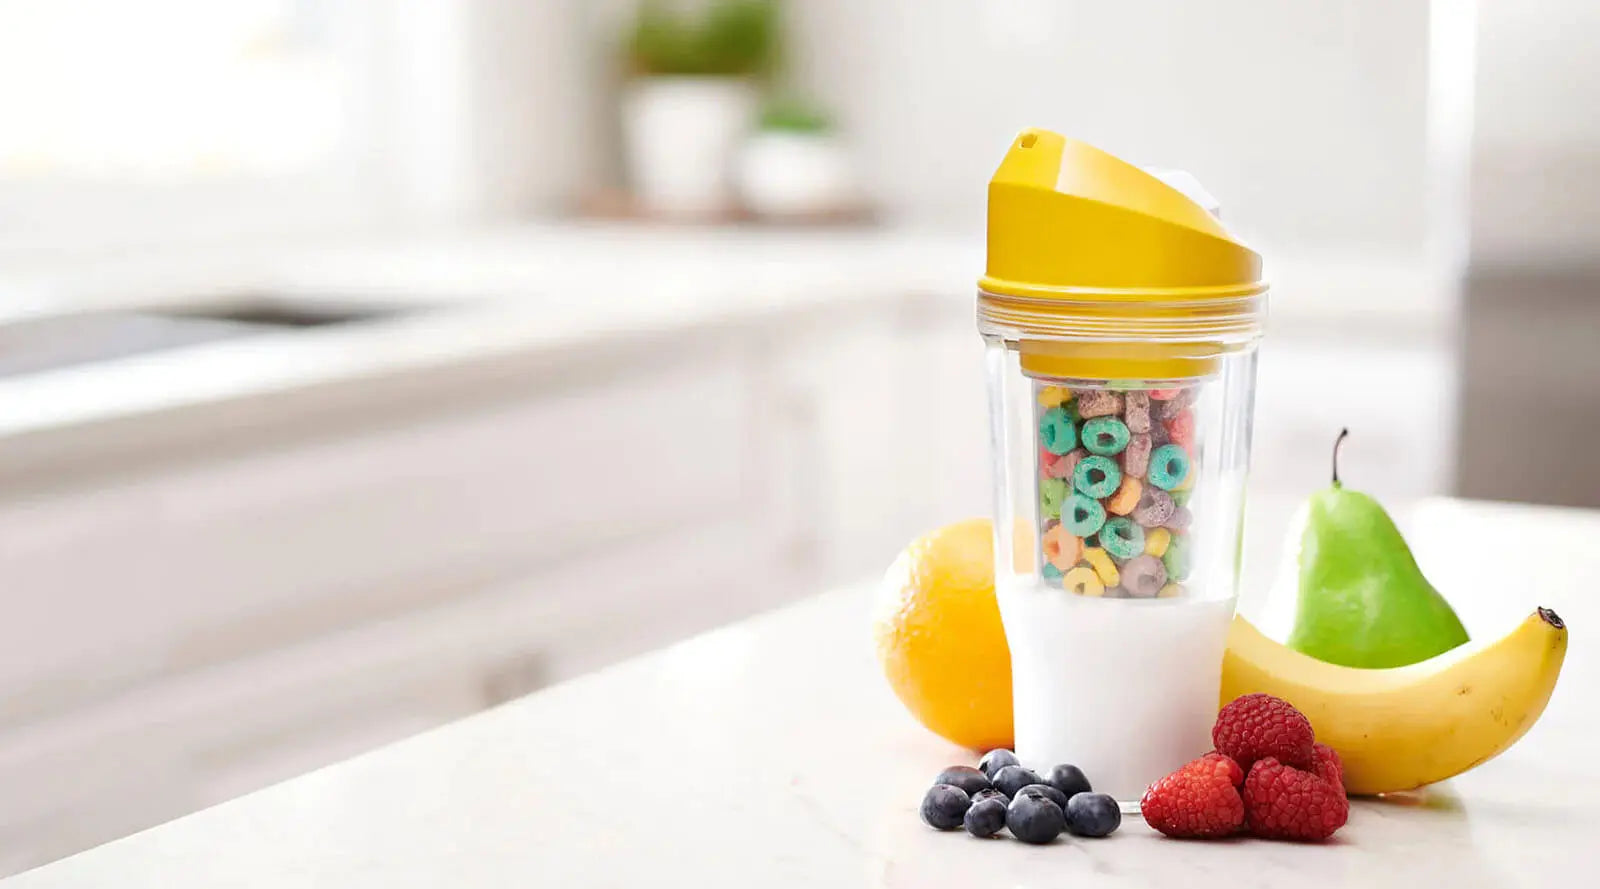  Cereal On The Go, Cup Container Breakfast Drink Milk